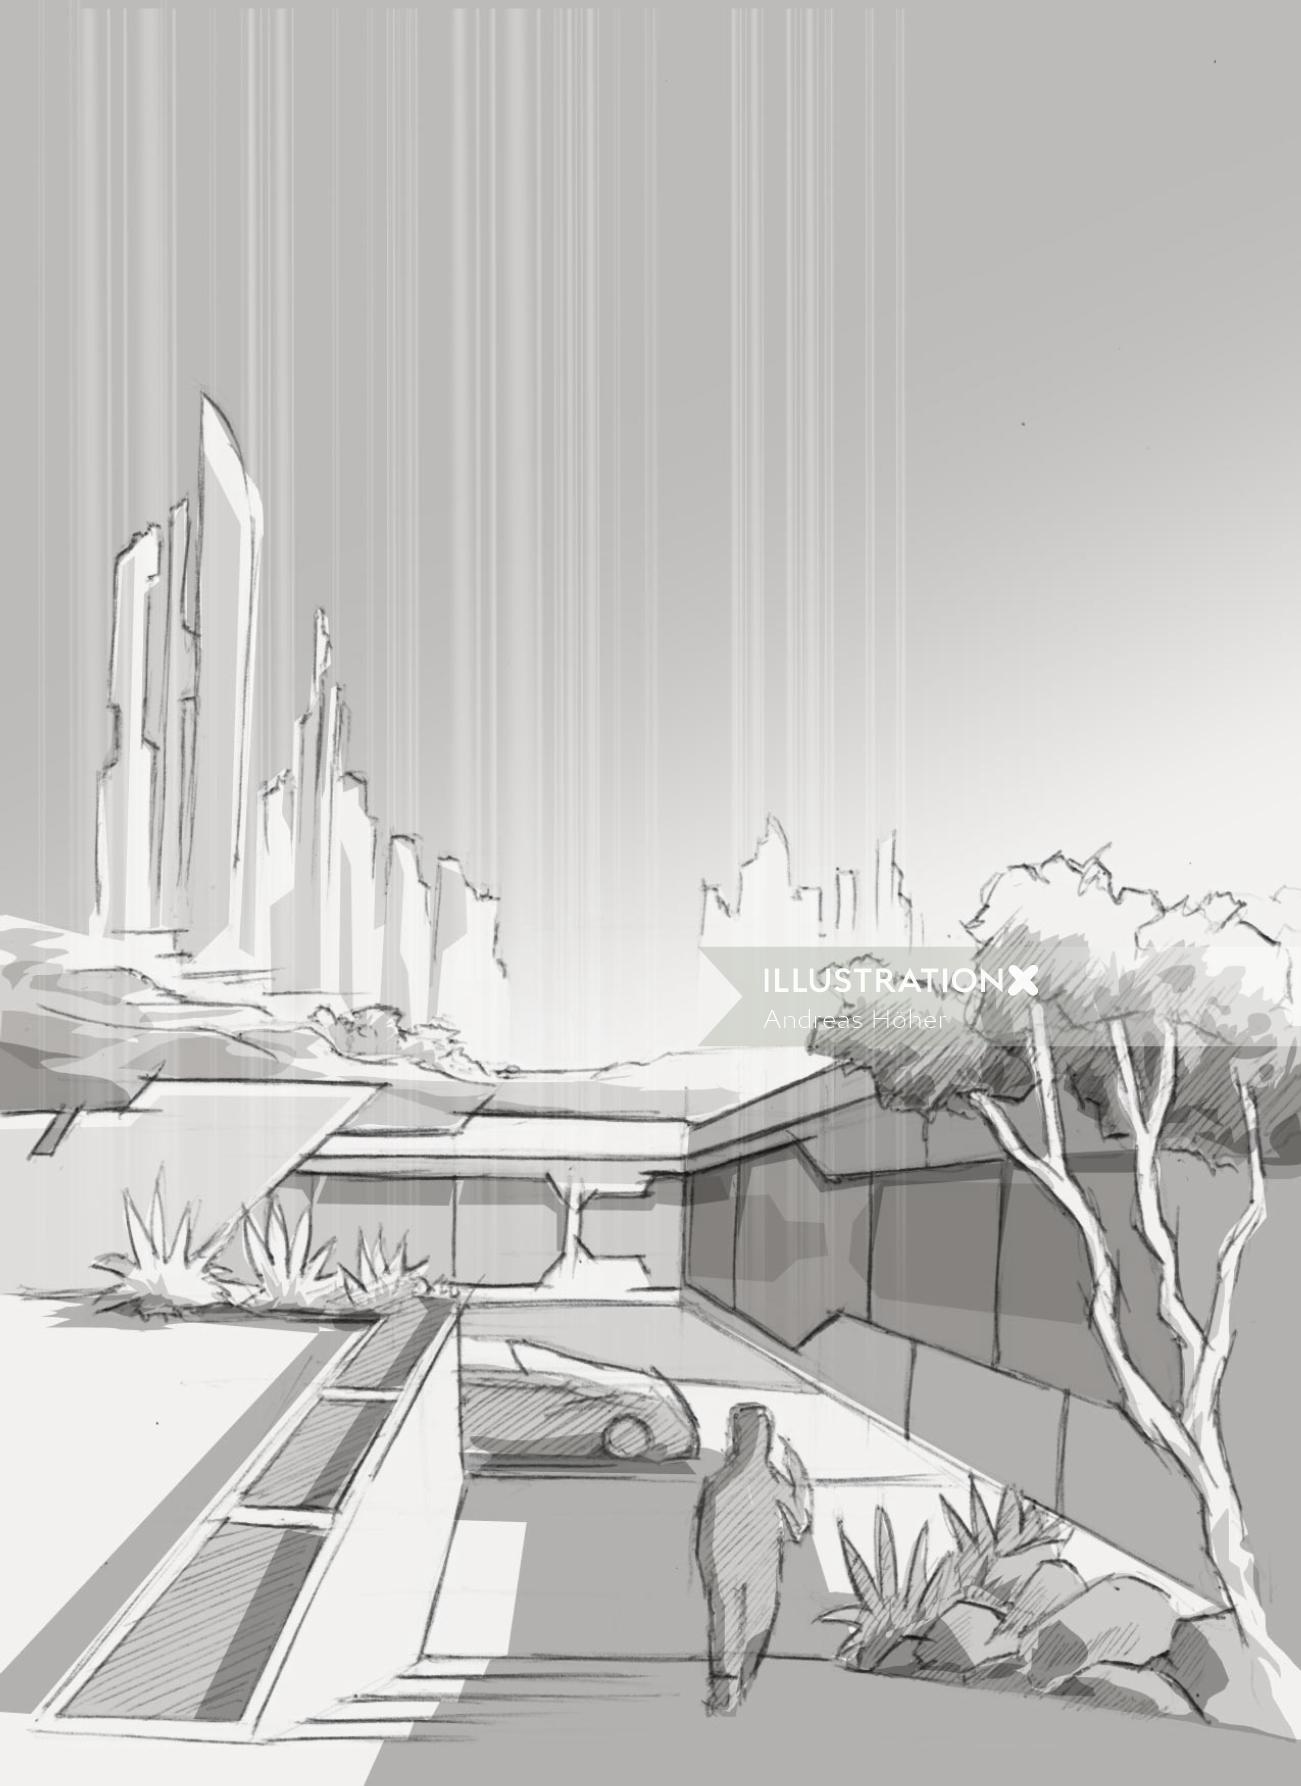 Line art of city with trees